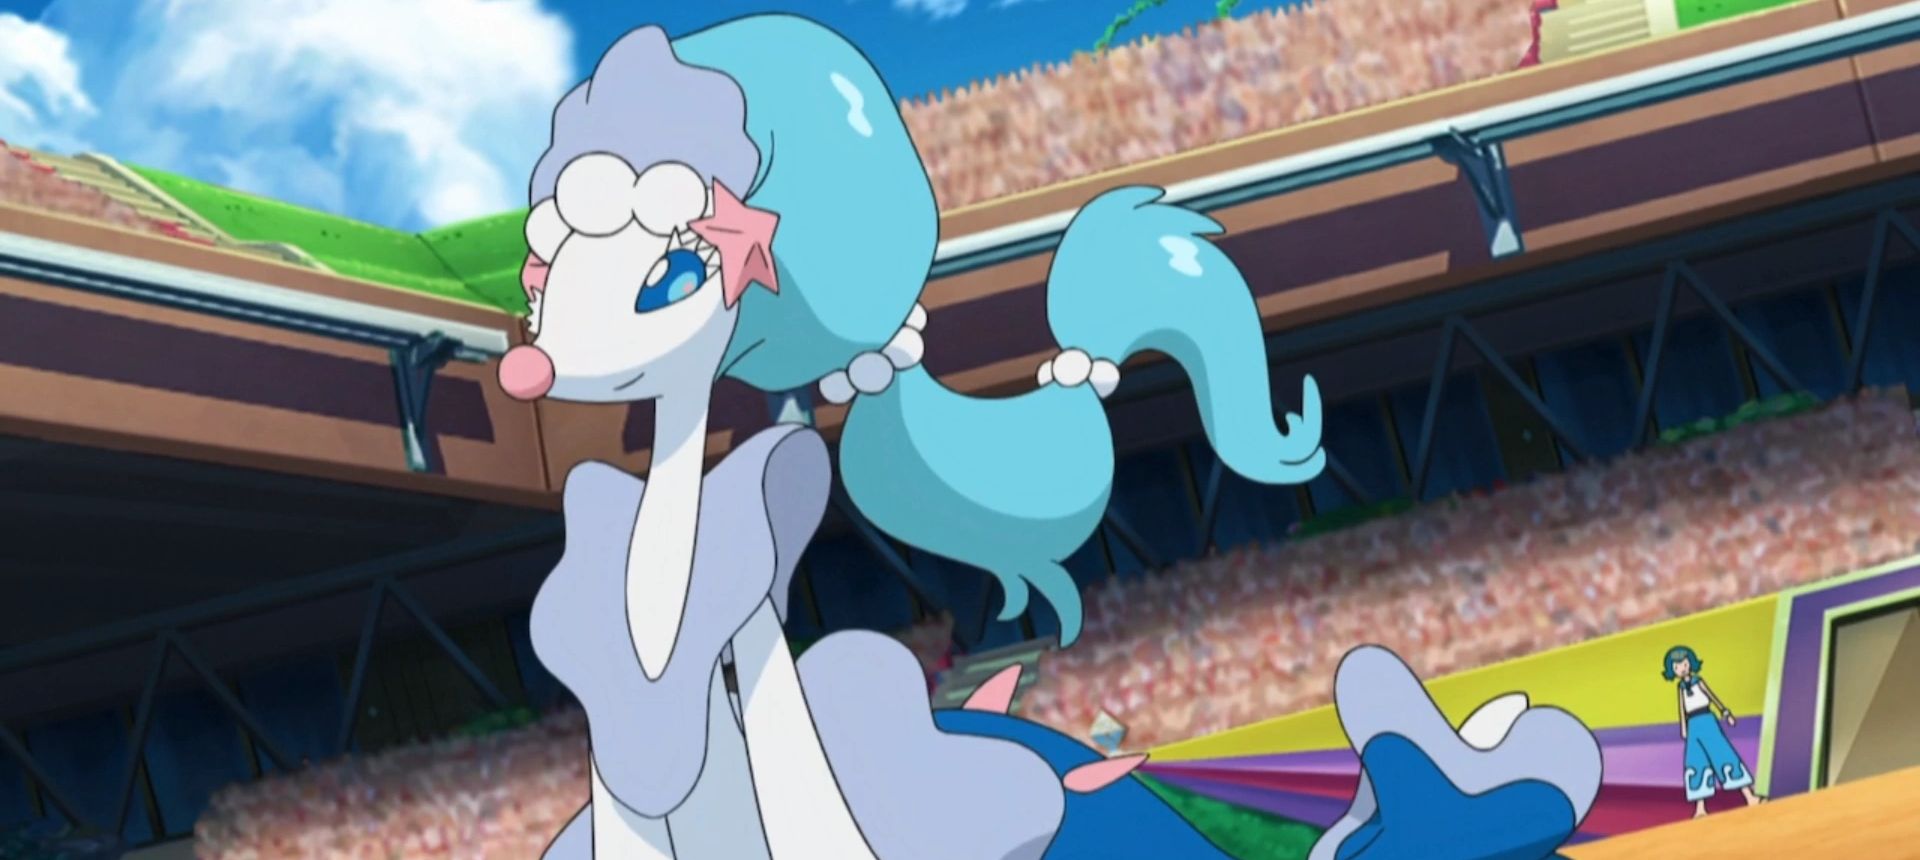 Primarina looks in the distance in a crowded stadium in the Pokemon anime.